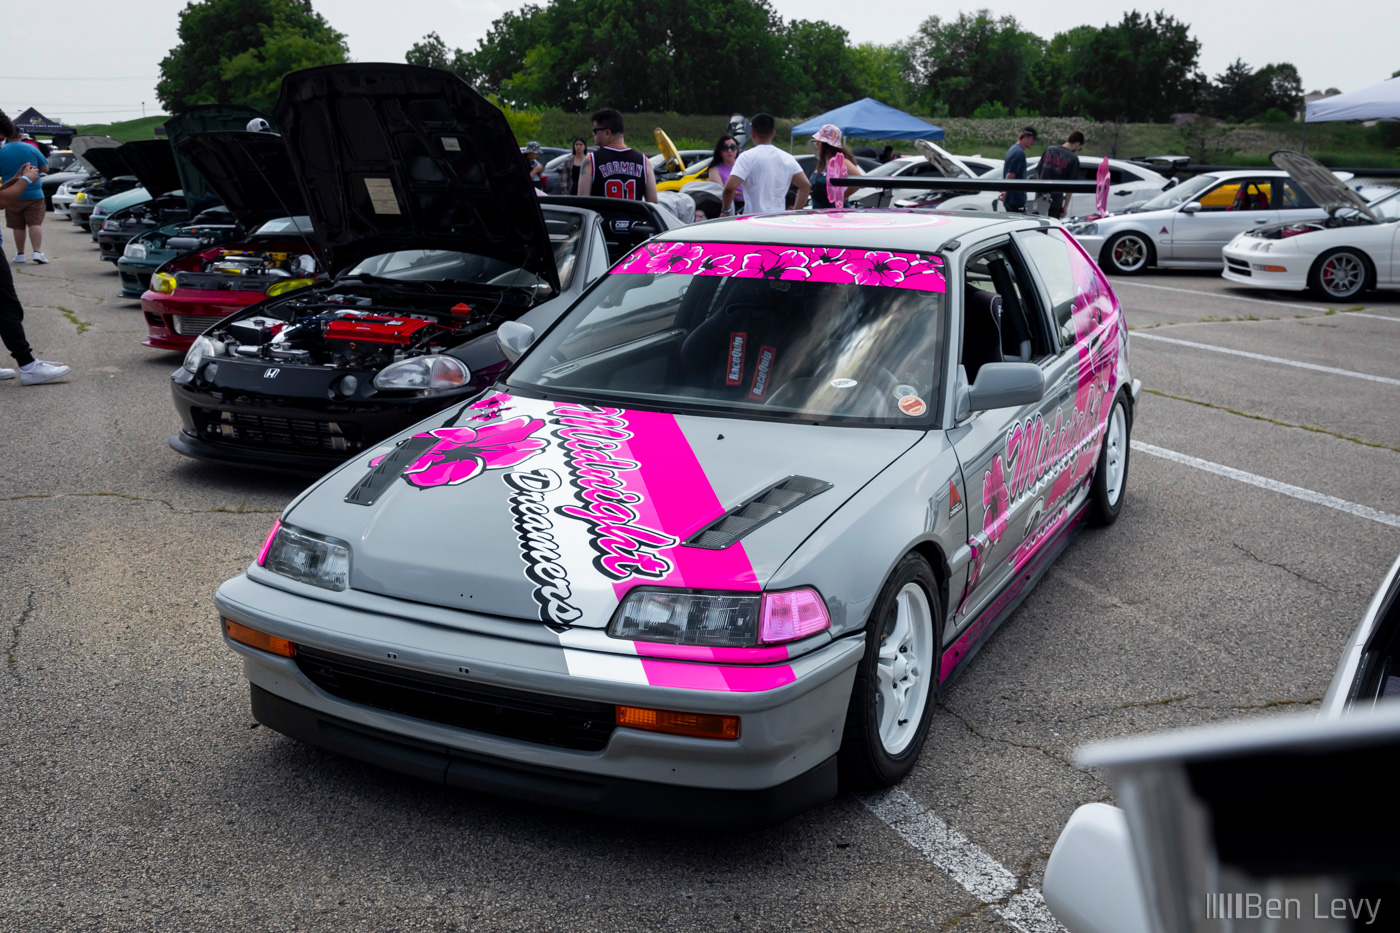 Grey EF Honda Civic with White and Pink Wrap